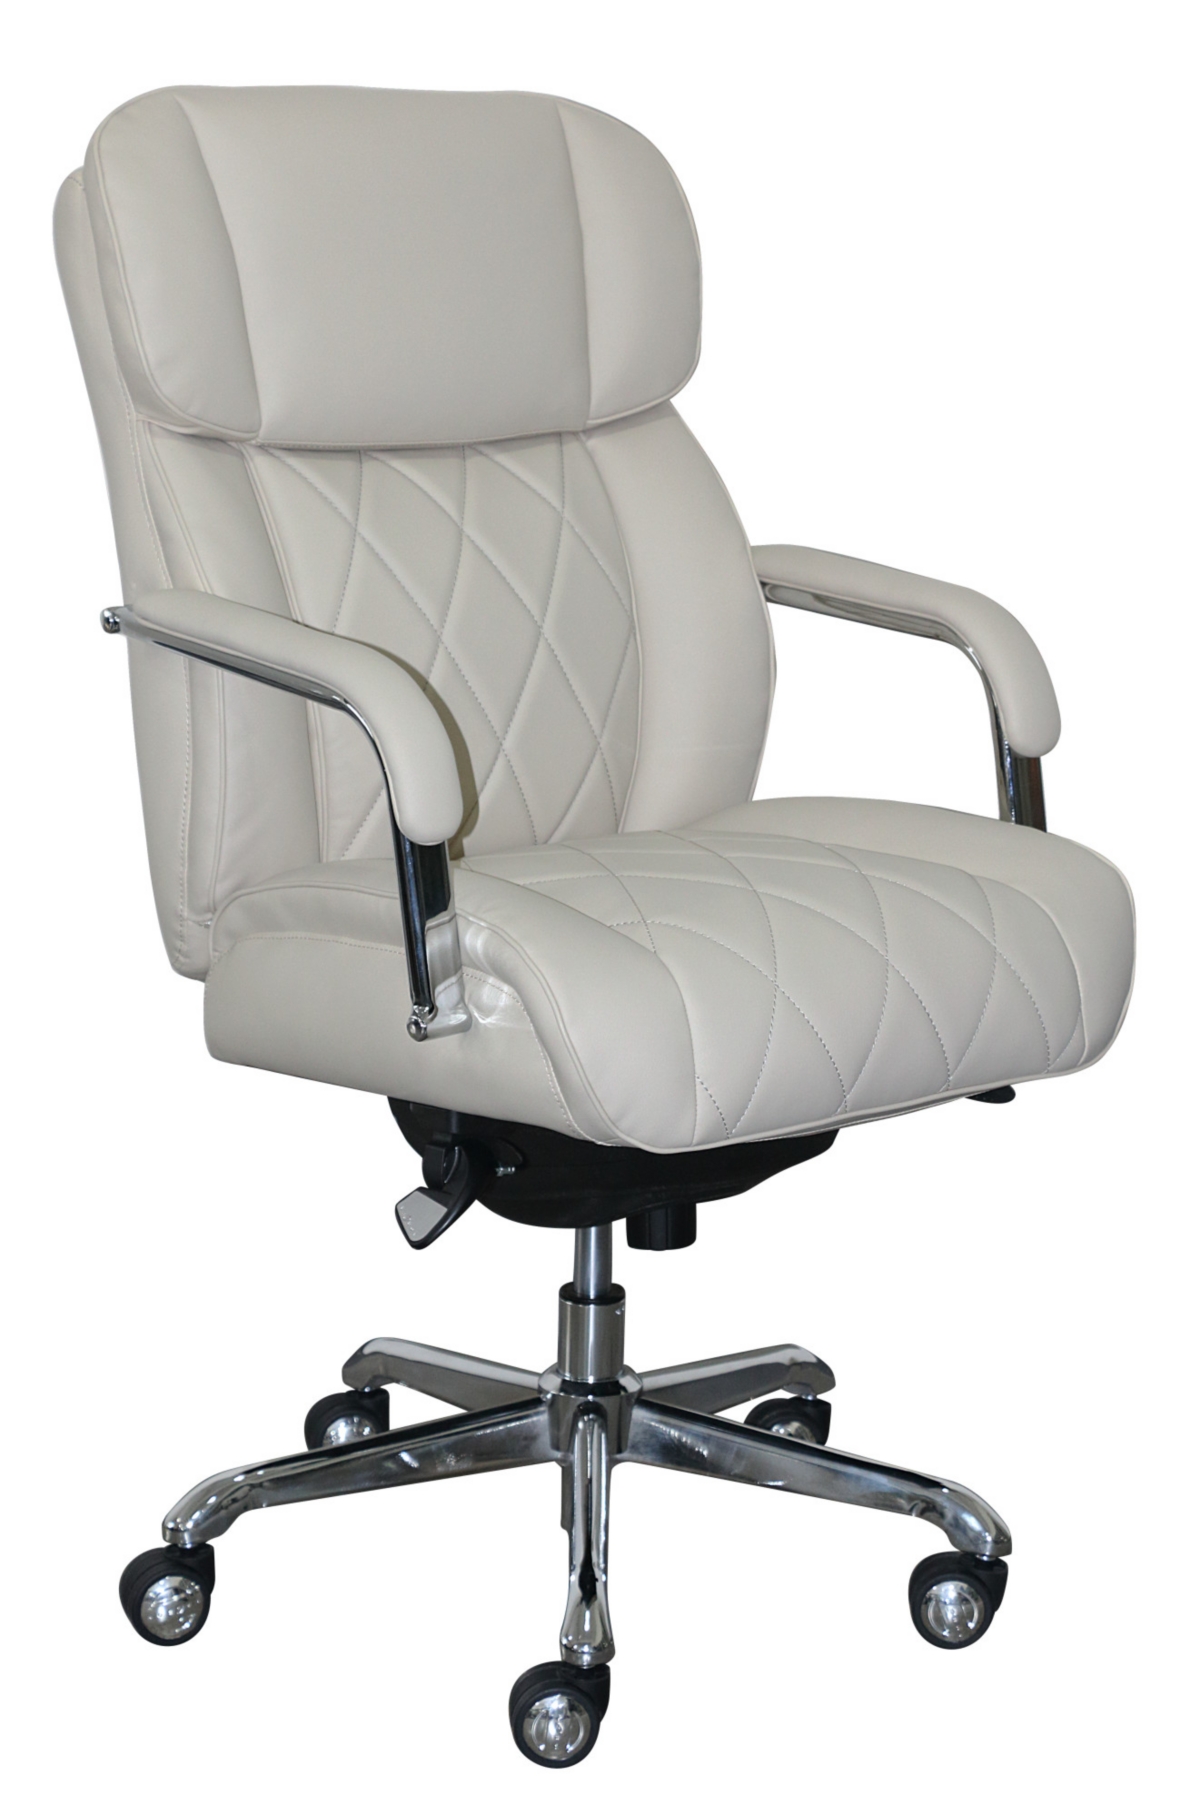 La-z-boy Sutherland Quilted Leather Office Chair In Ivory